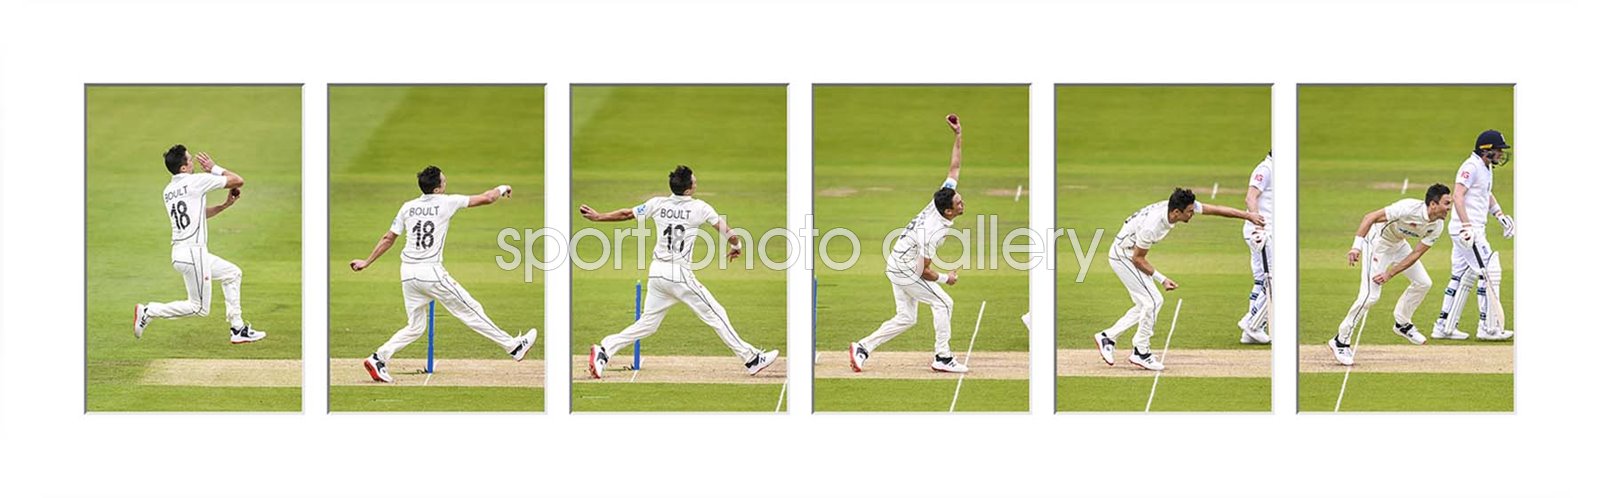 The best techniques for being a cricket fast bowler, according to science